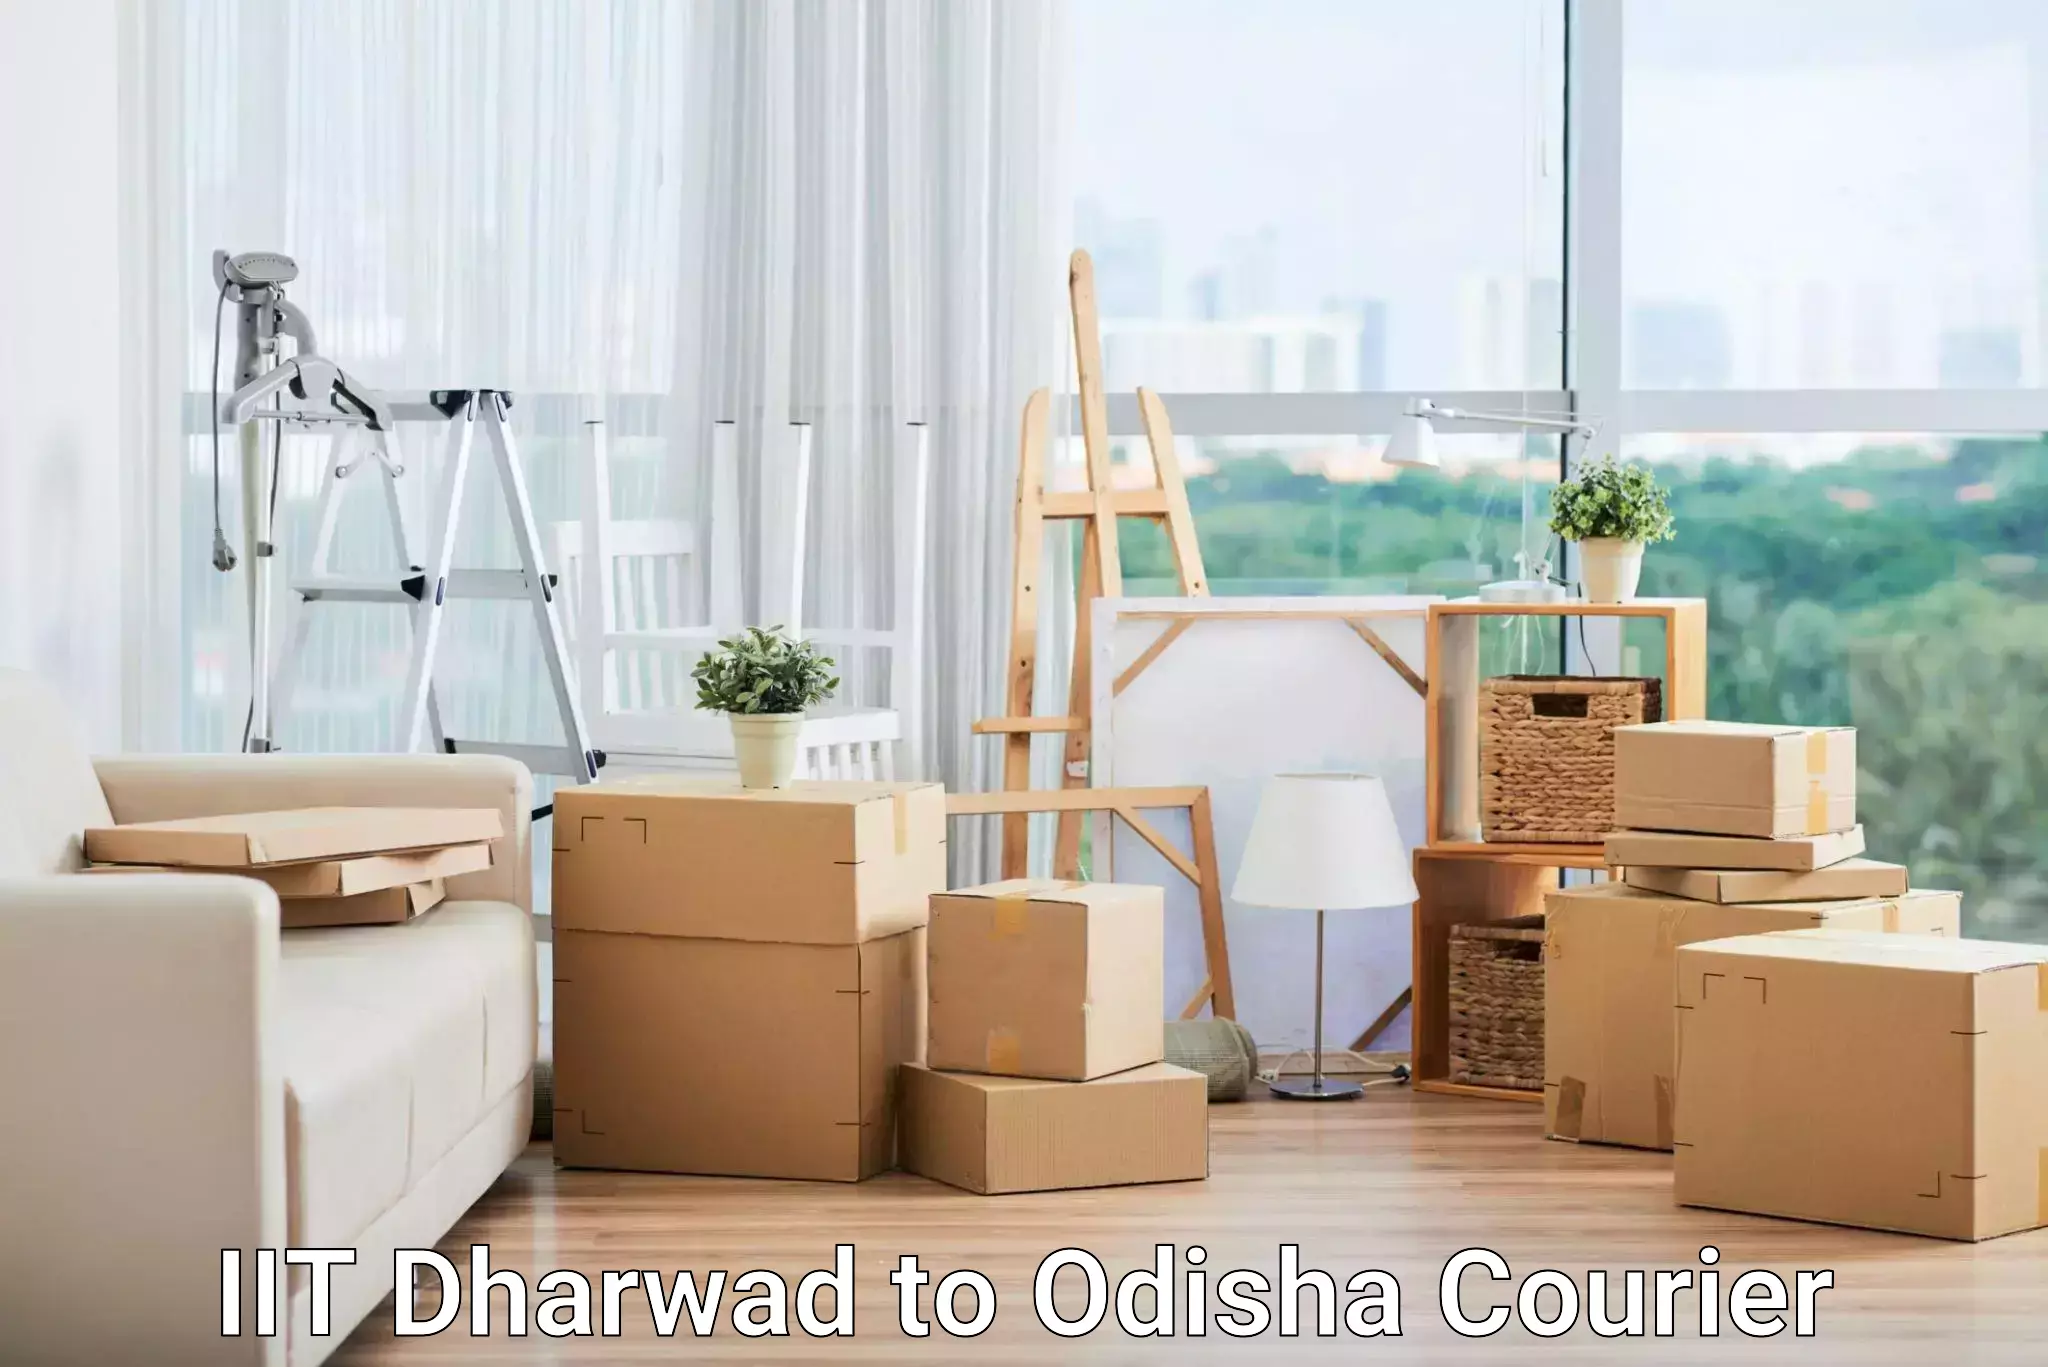 Affordable parcel service IIT Dharwad to Sinapali